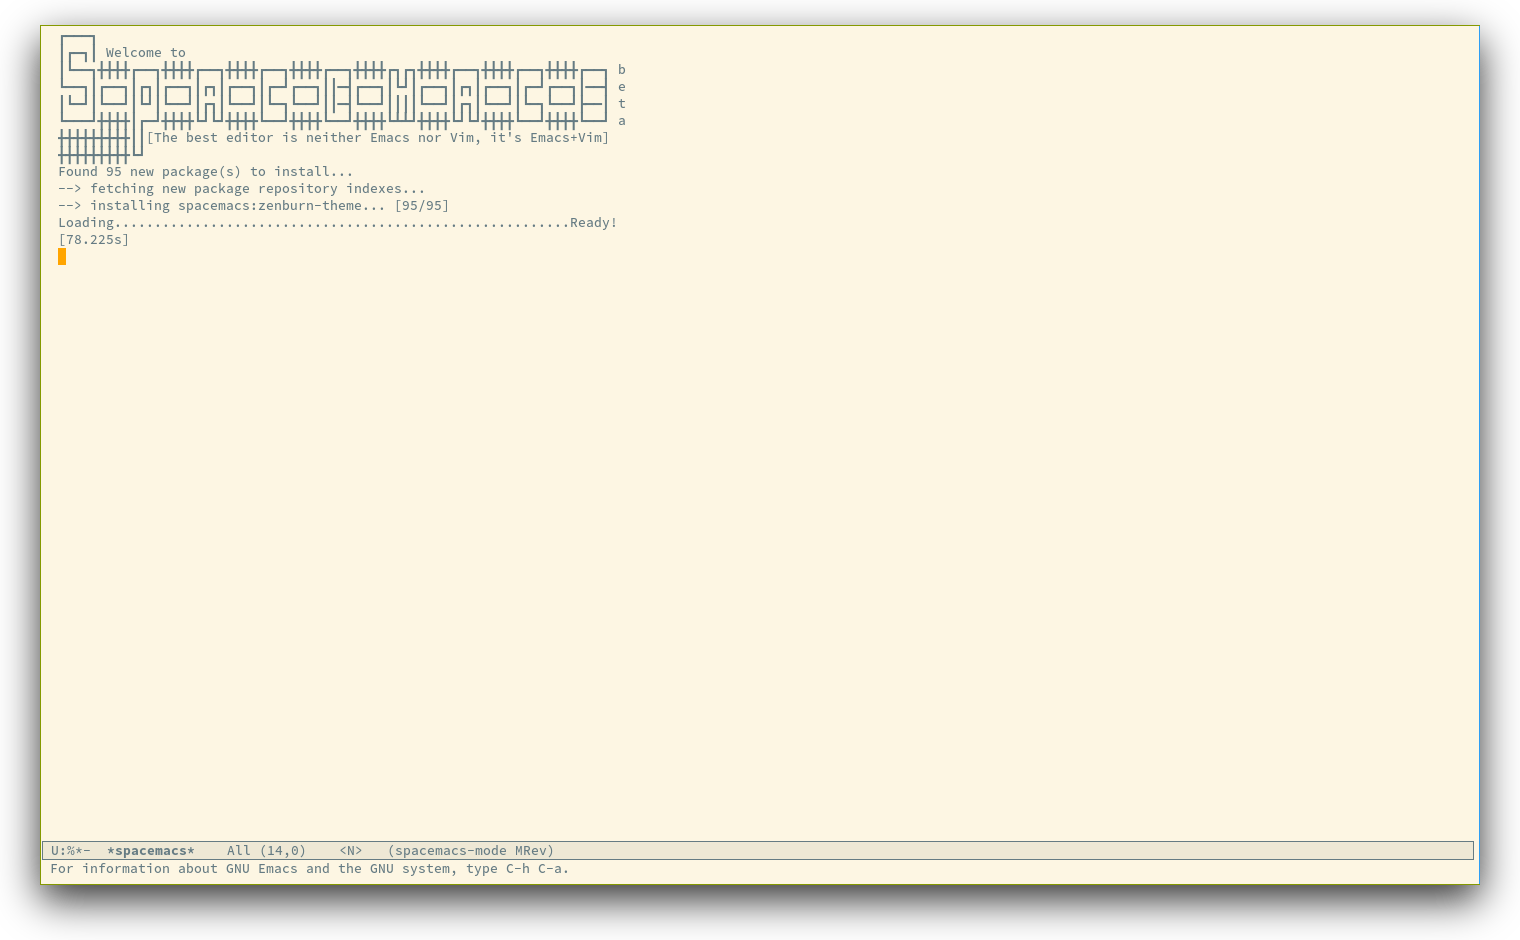 /TakeV/spacemacs/media/commit/163b82c96021b00b69e20b99c81558d38006e391/doc/img/spacemacs-startup.png